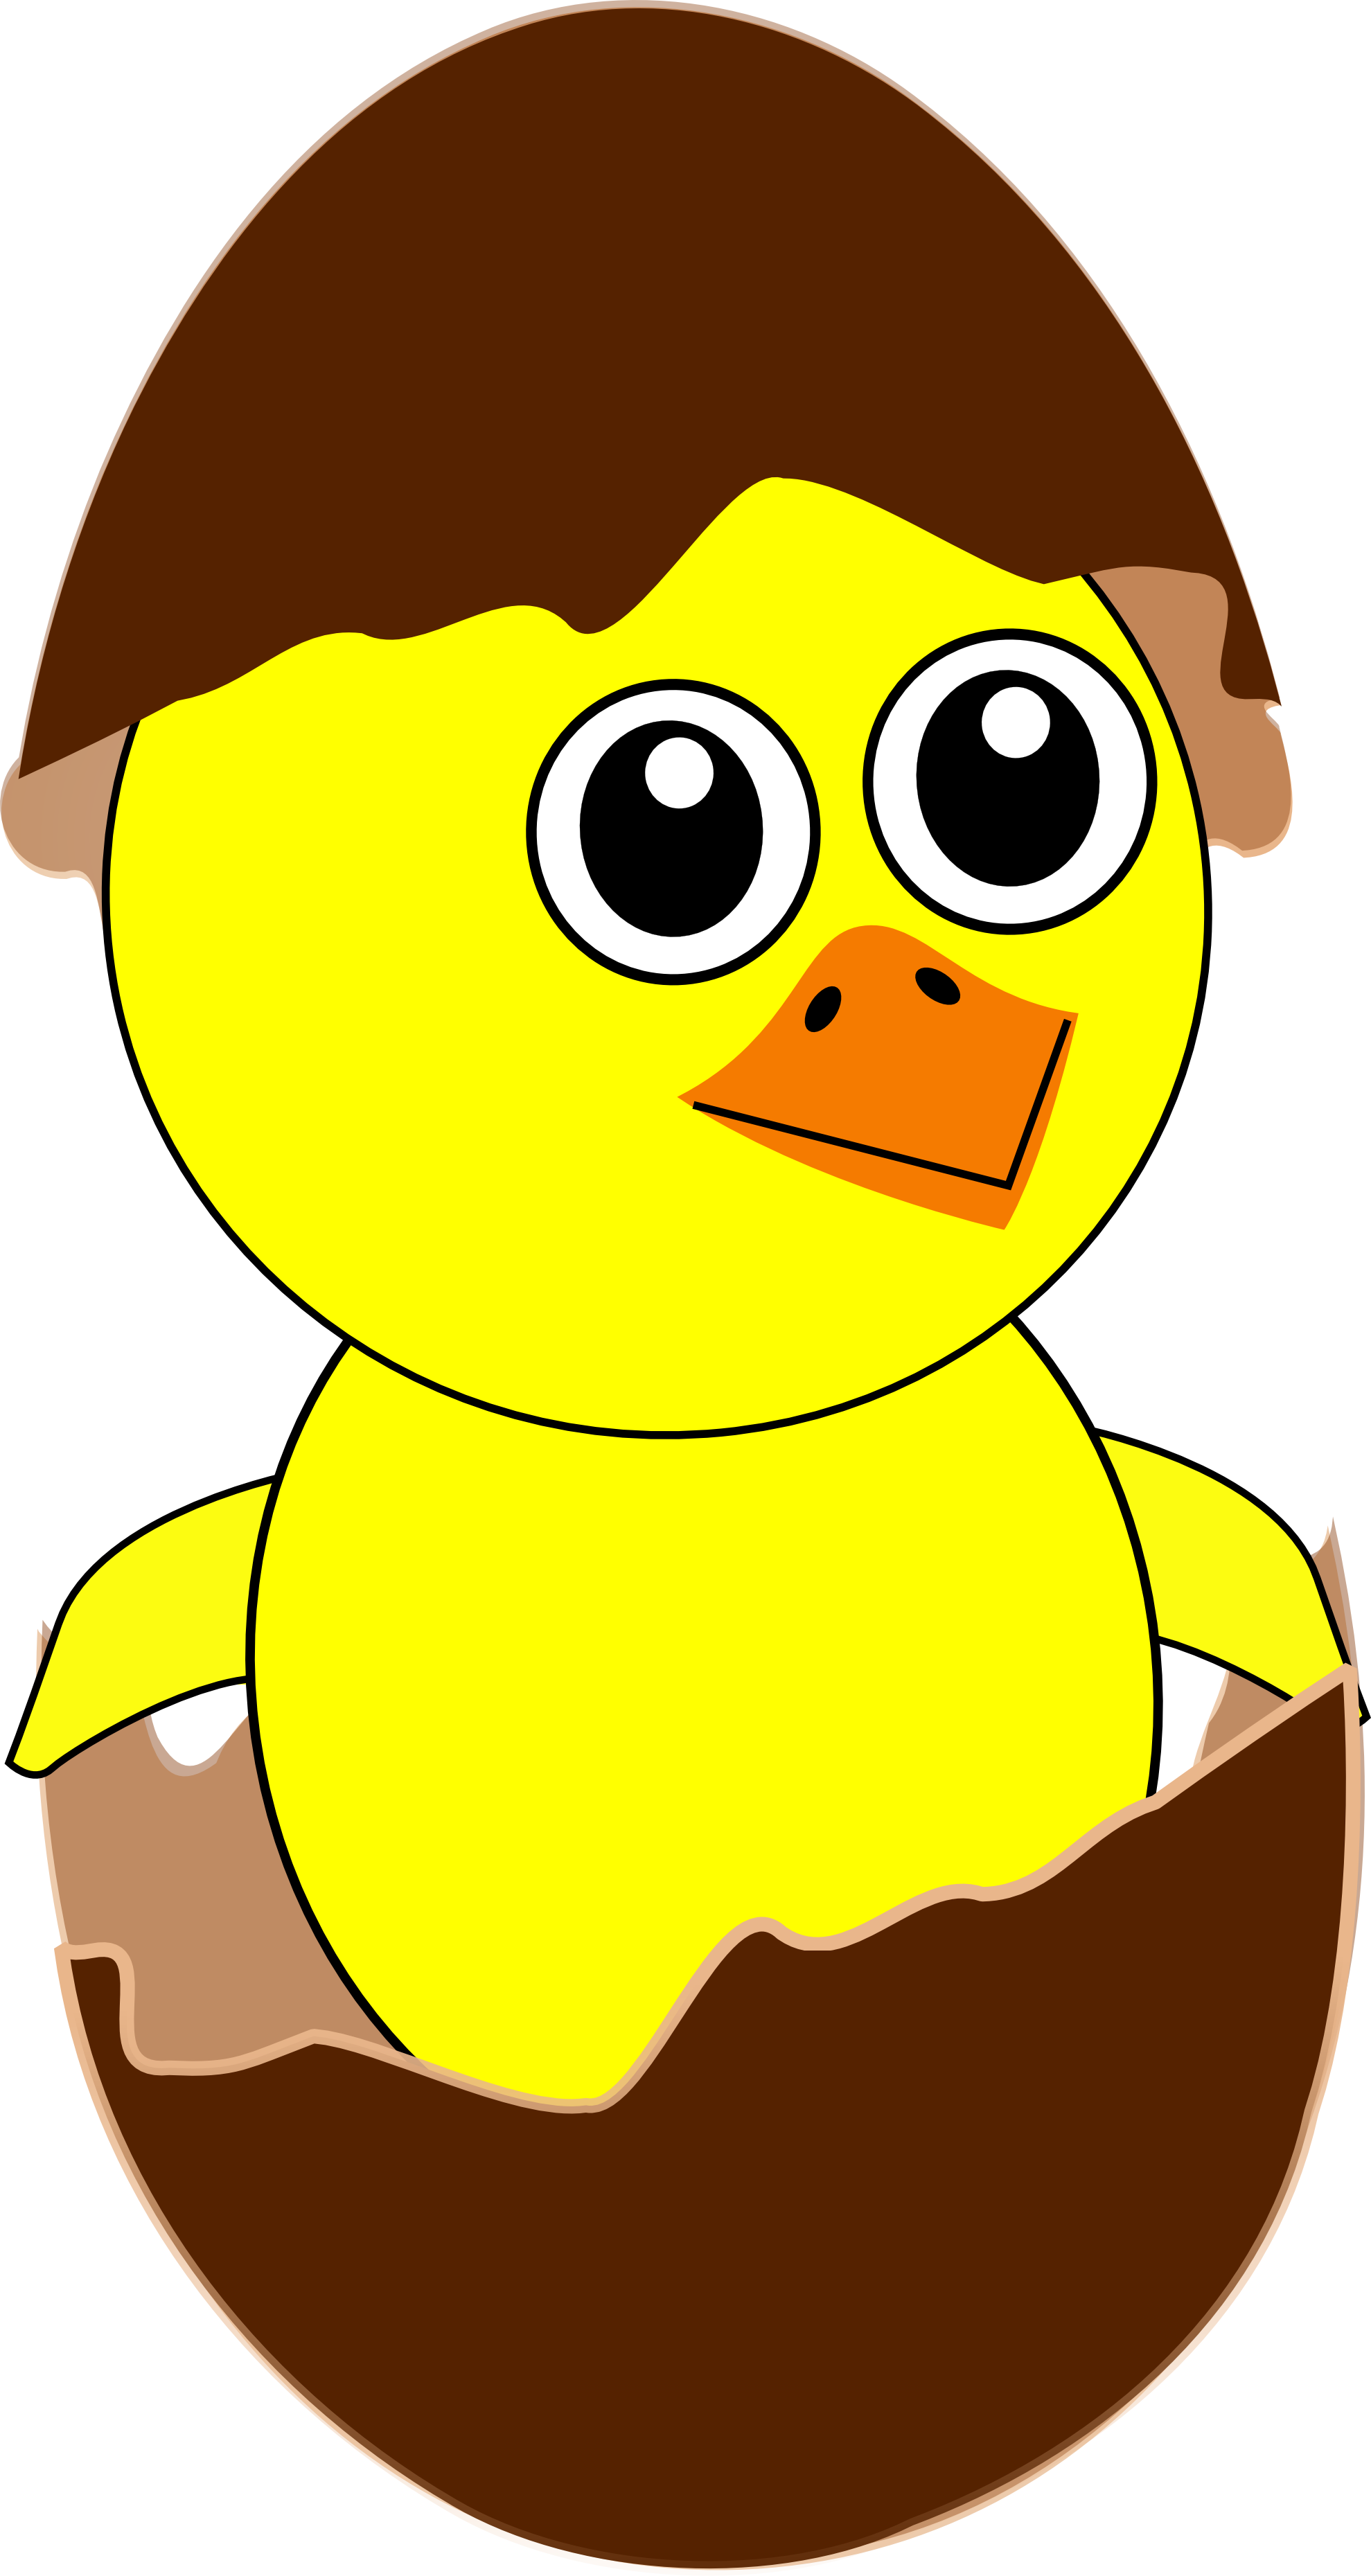 Easter Chick Images - ClipArt Best